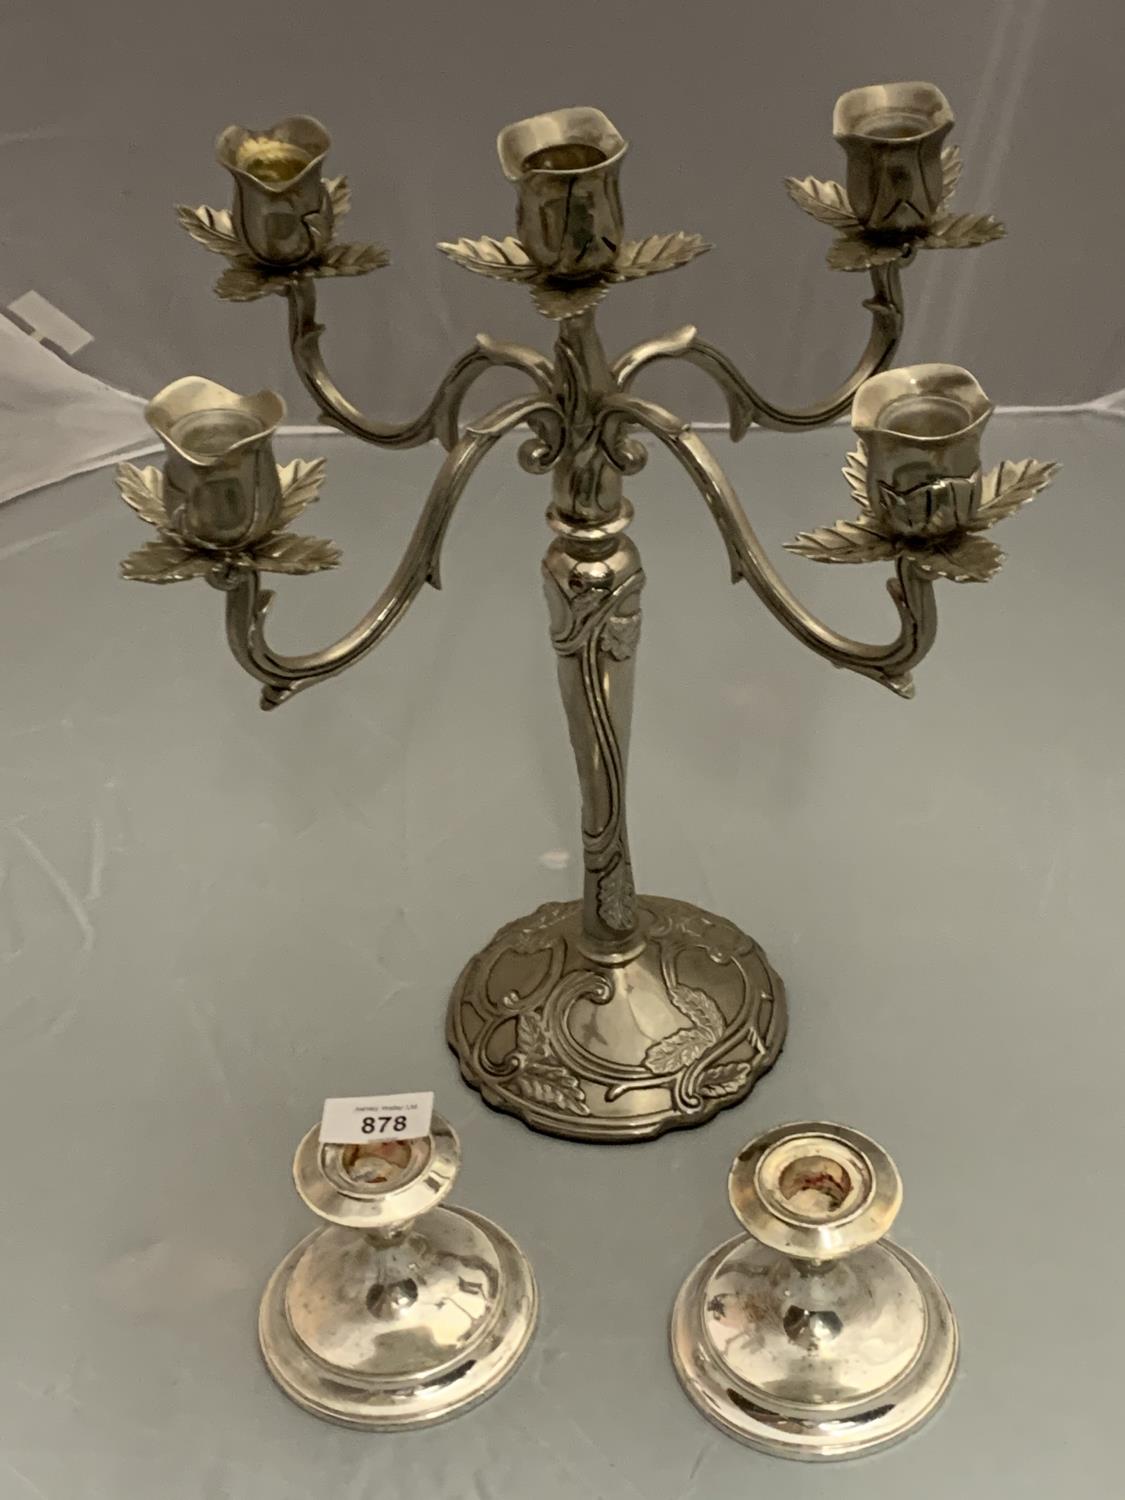 AN ORNATE SILVER PLATE CANDELABRA AND TWO CANDLESTICKS